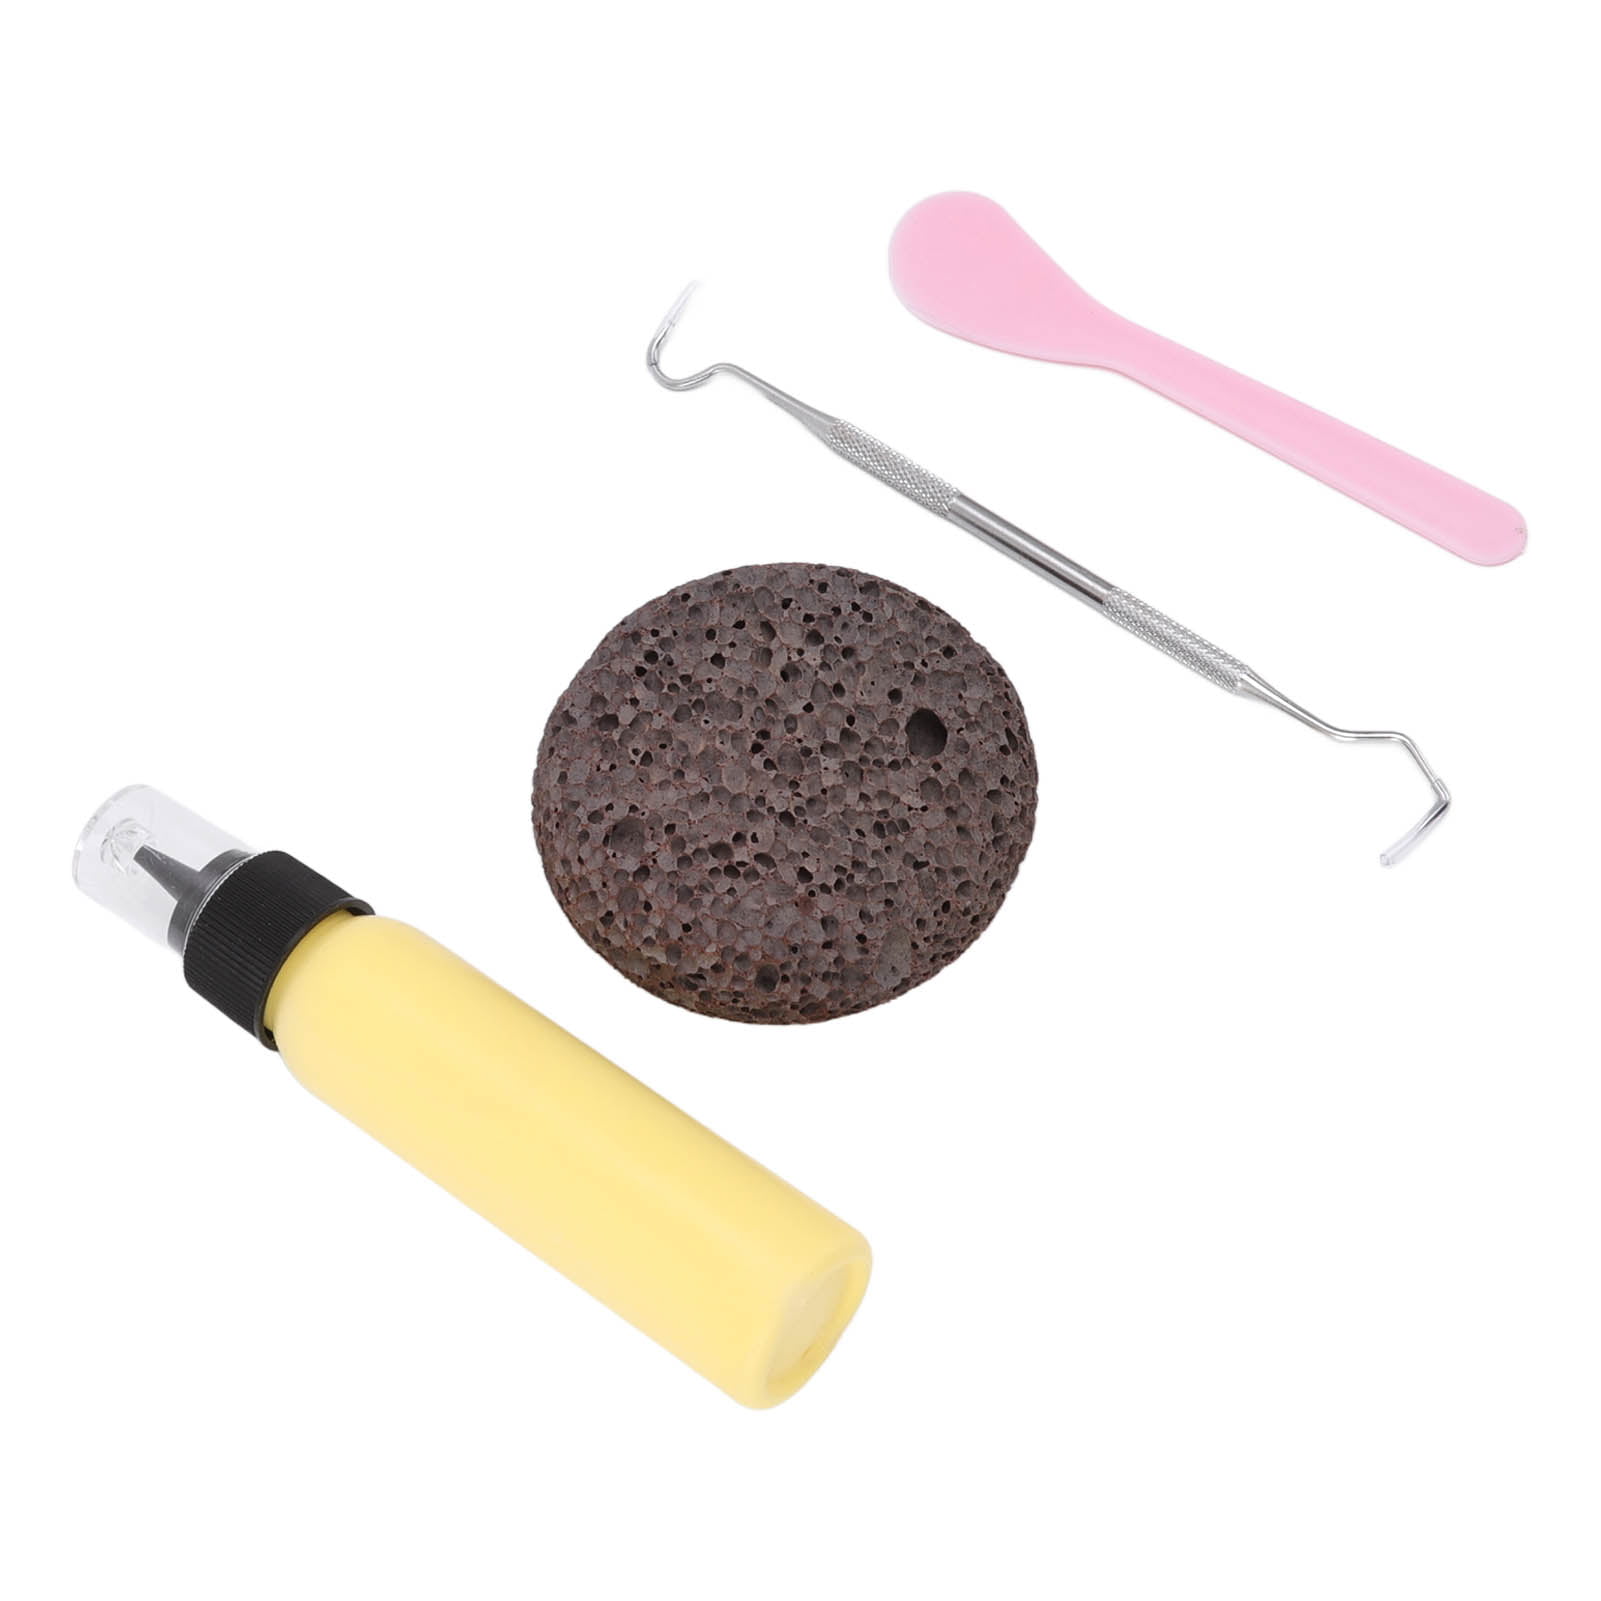 Pick Peel Stone Kit, Pick Rock for Anxiety, DIY Picking Rock Toy Skin Picky  Pumice Stone Toy Adults Teenagers Children, Dermatillomania, ADHD, OCD